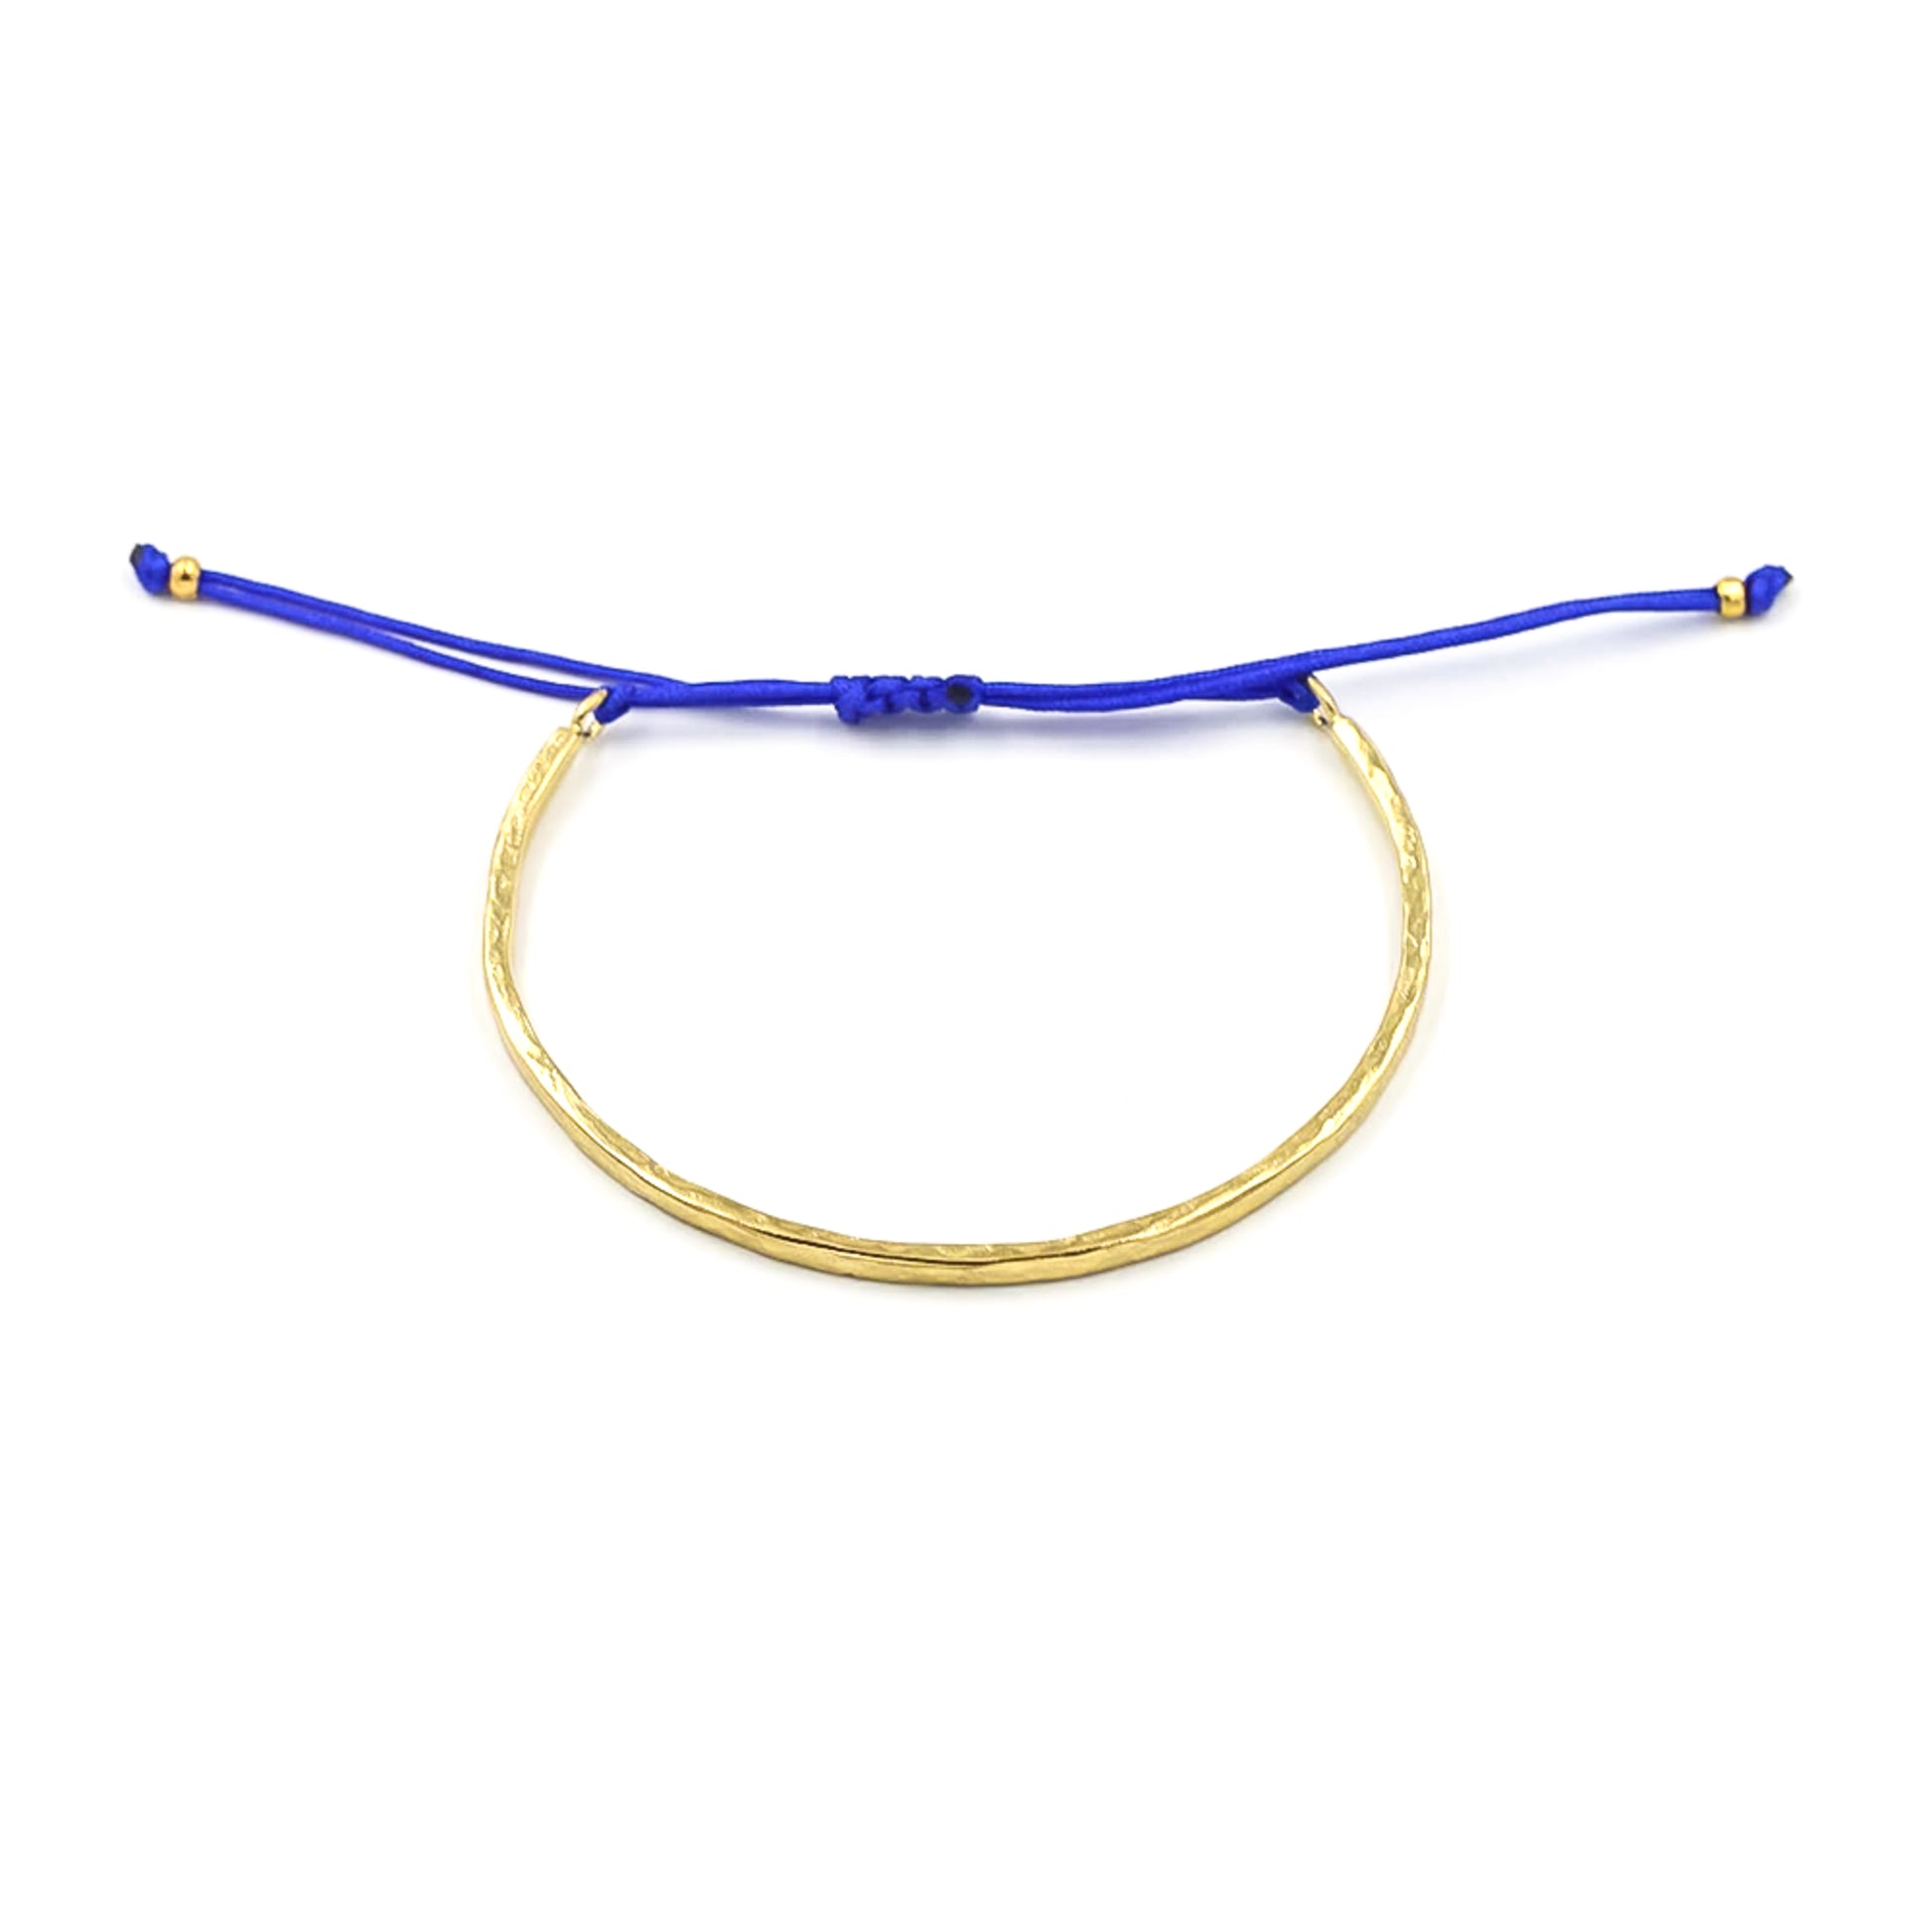 Womens Gold Thin Adjustable String Bracelet at RM Kandy